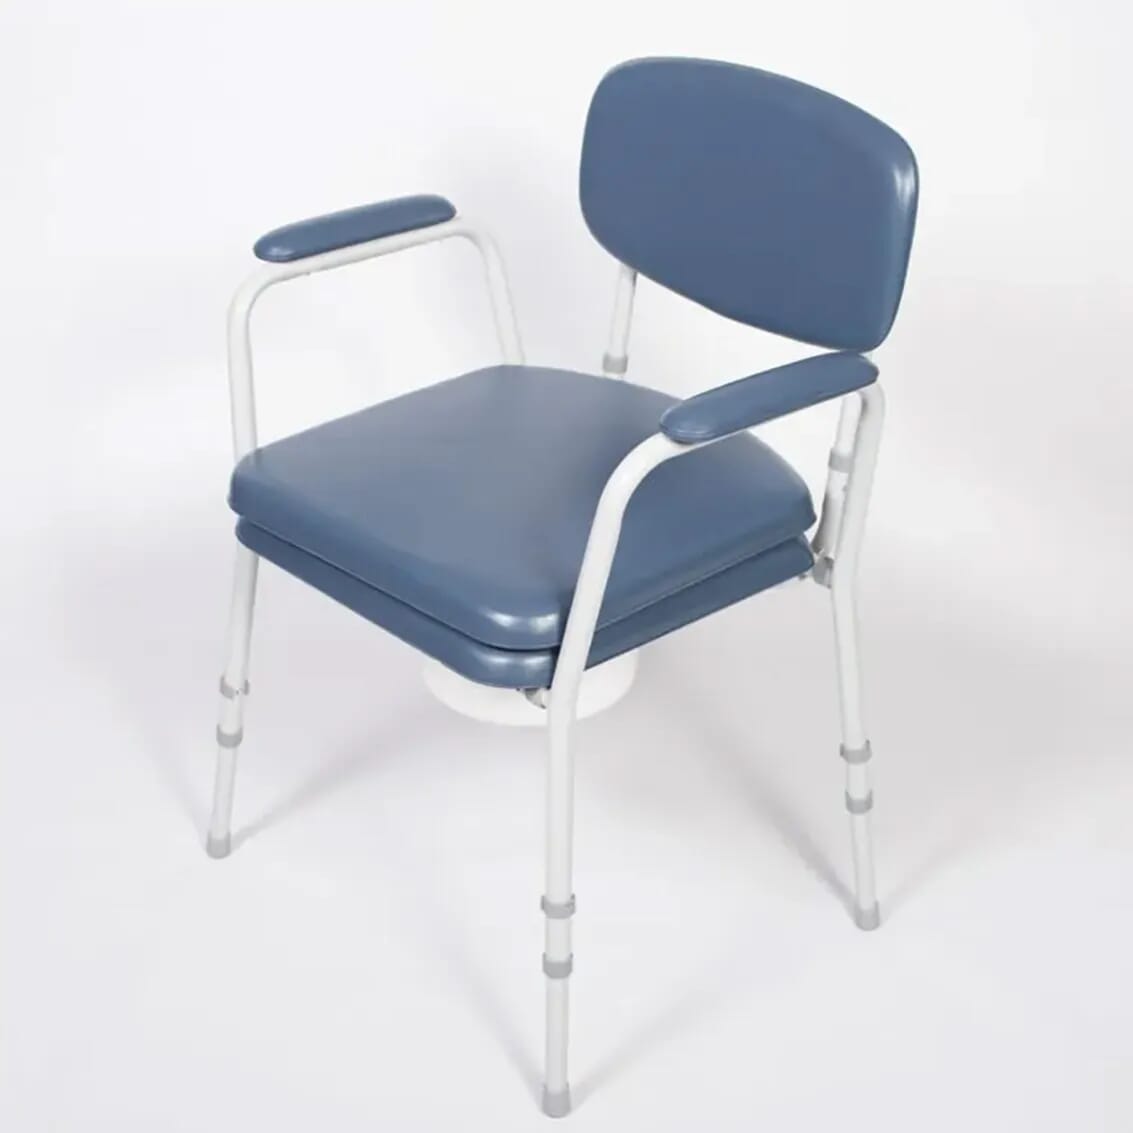 View Height Adjustable Comfort Commode Chair information